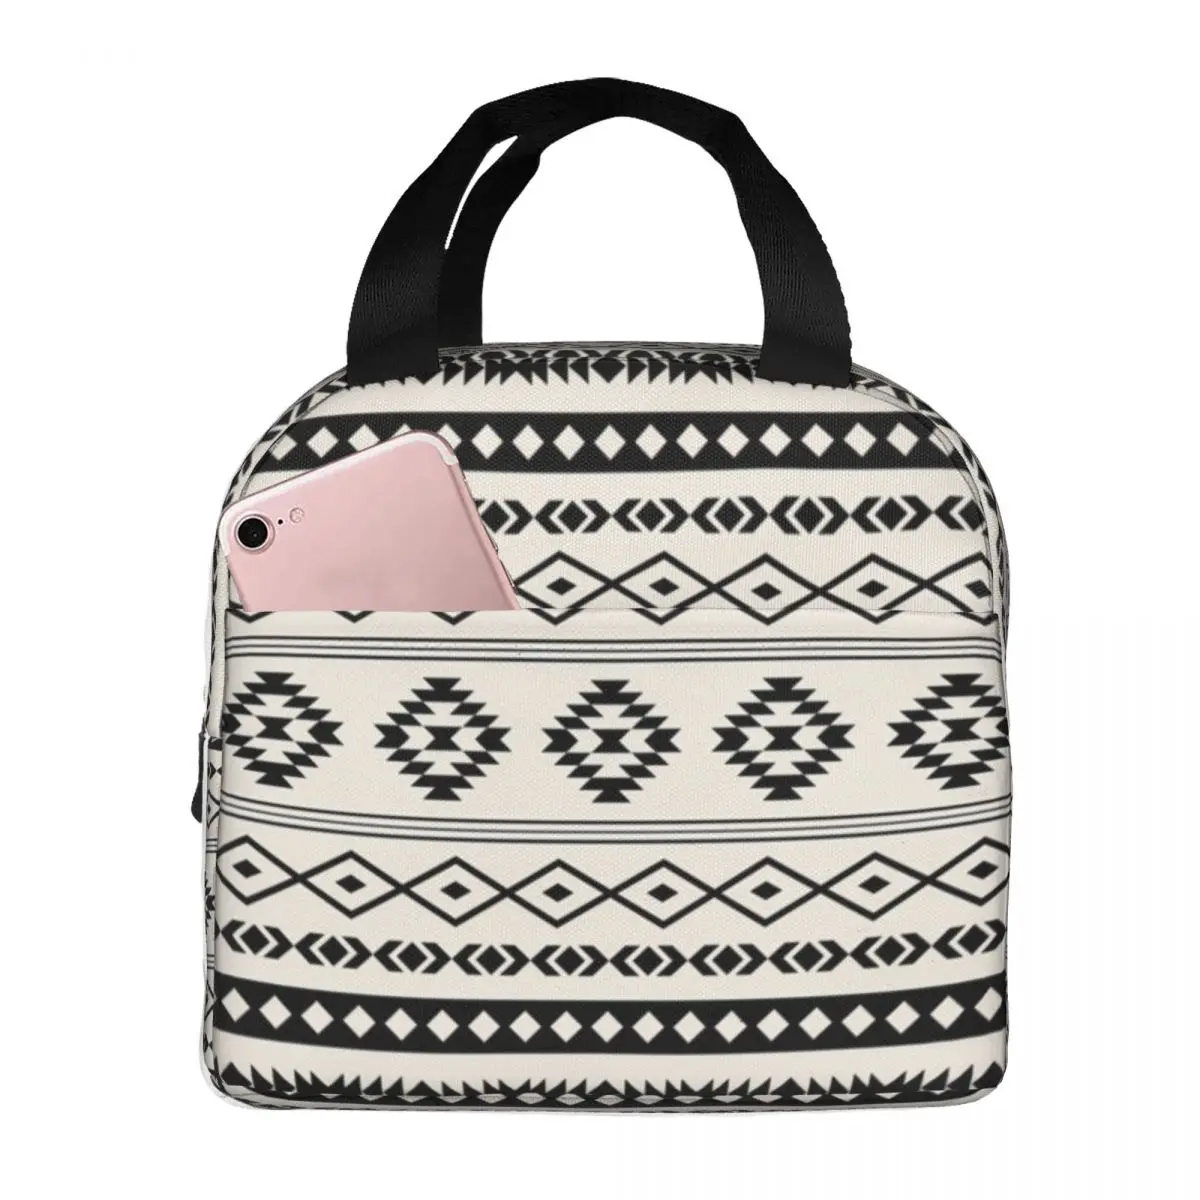 Bohemian Aztec Black On Cream Mixed Motifs Lunch Bag Waterproof Insulated Cooler Thermal Cold Food School Lunch Box for Women